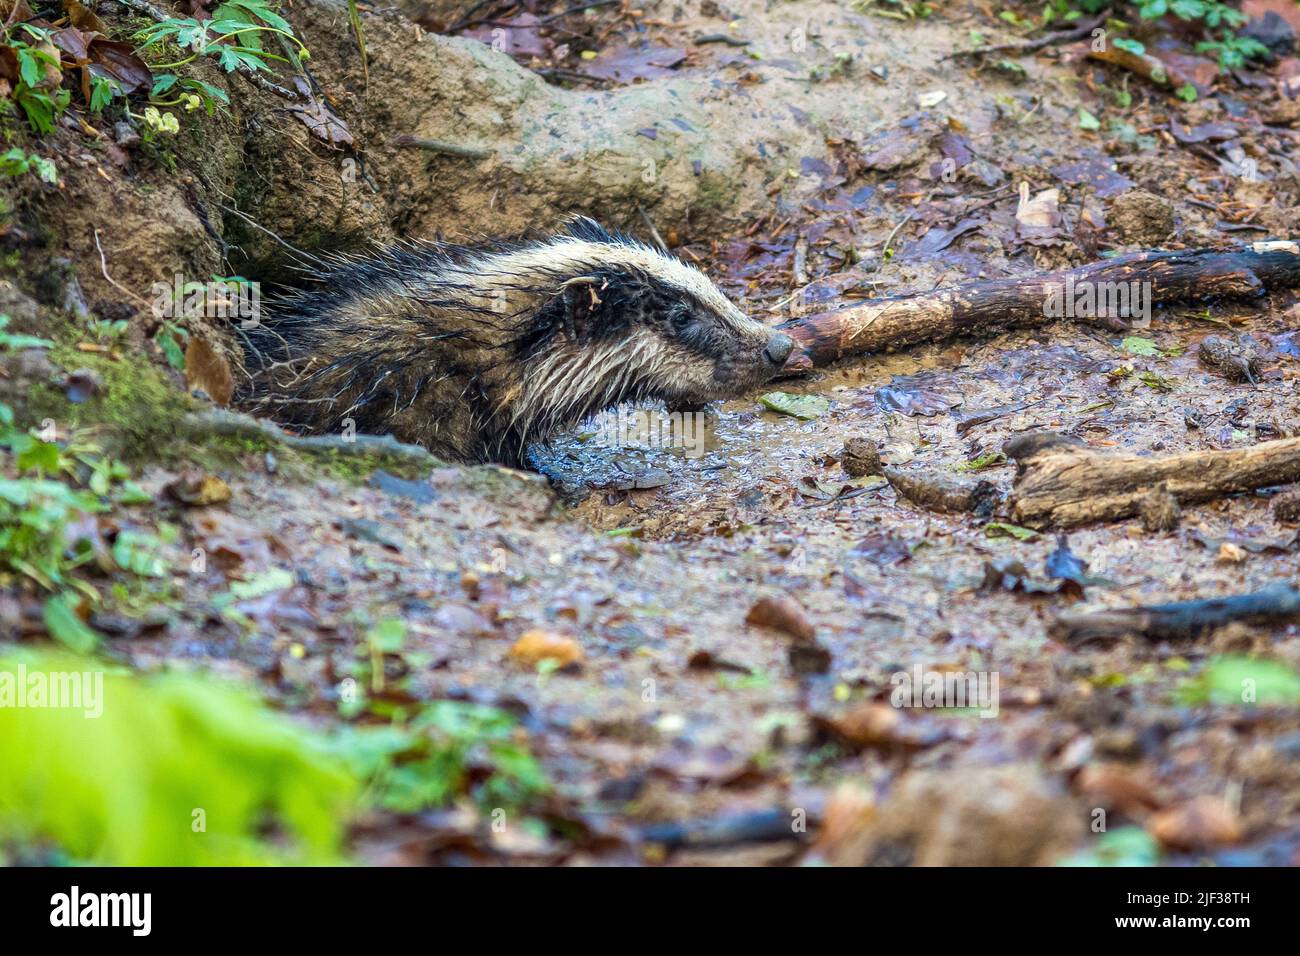 Old World badger, Eurasian badger (Meles meles), young animal looking out a den, side view, Germany, Baden-Wuerttemberg Stock Photo